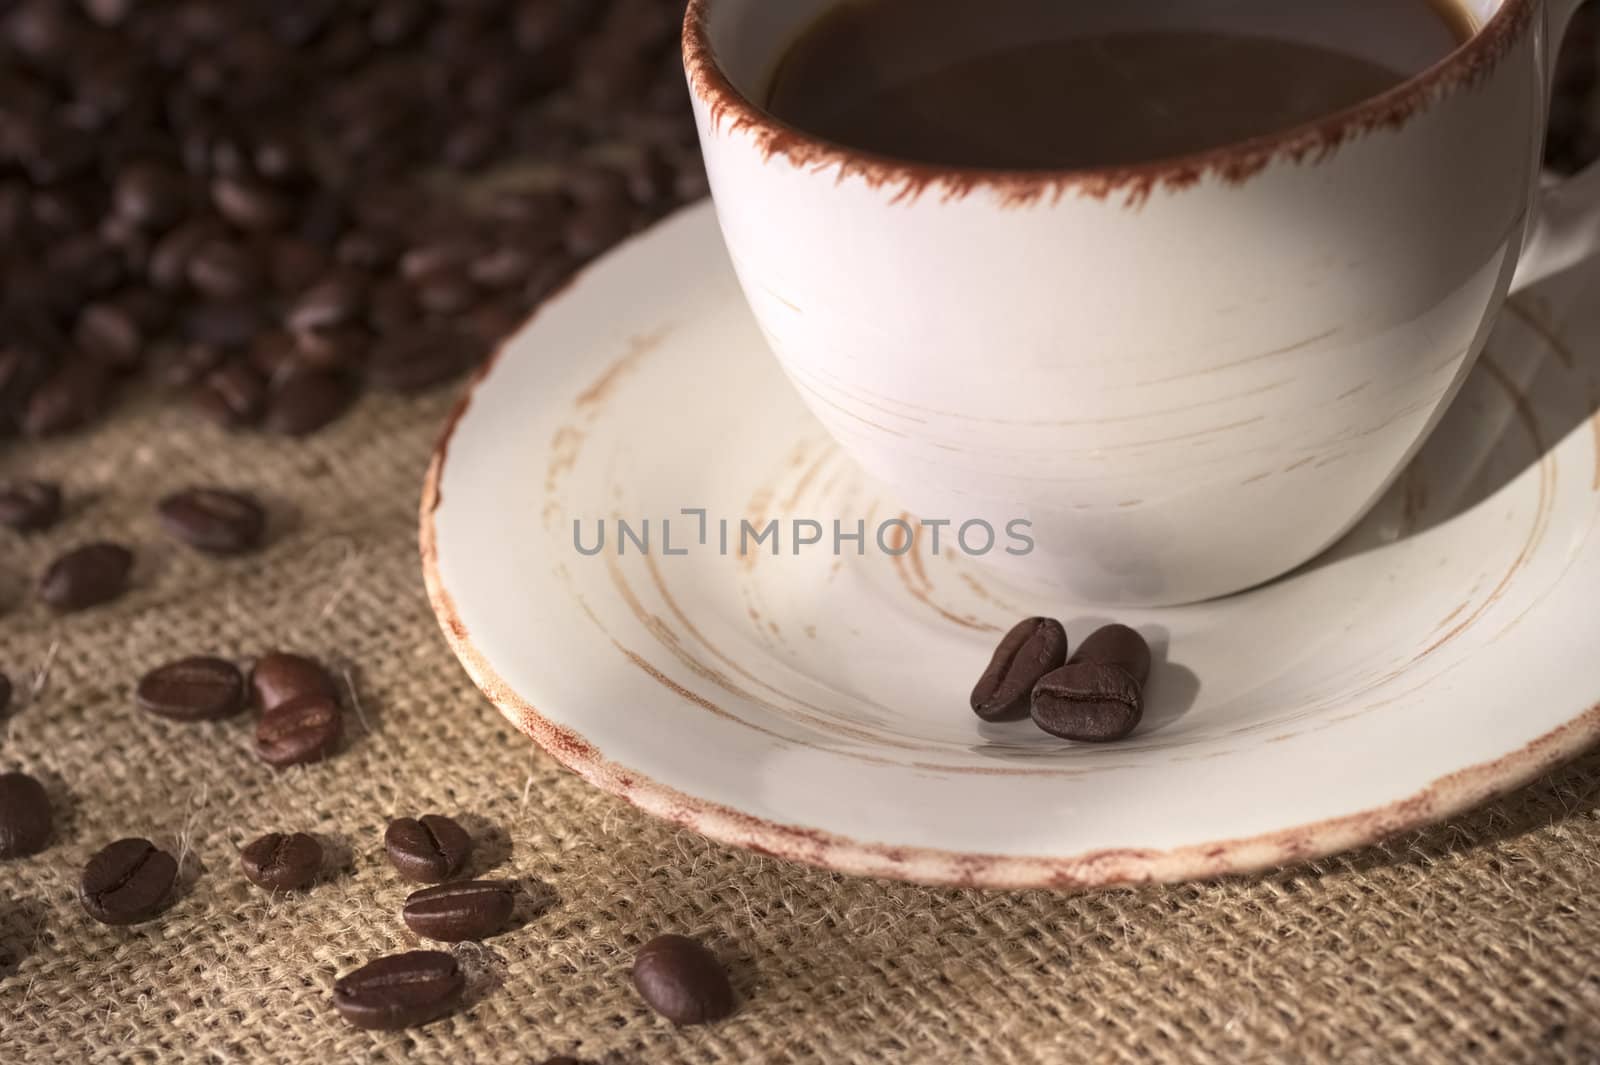 Coffee beans on the saucer of a coffee cup surrounded by many coffee beans on fabric called Jute (Very Shallow Depth of Field, Focus on the front coffee bean on the saucer and some on the fabric)